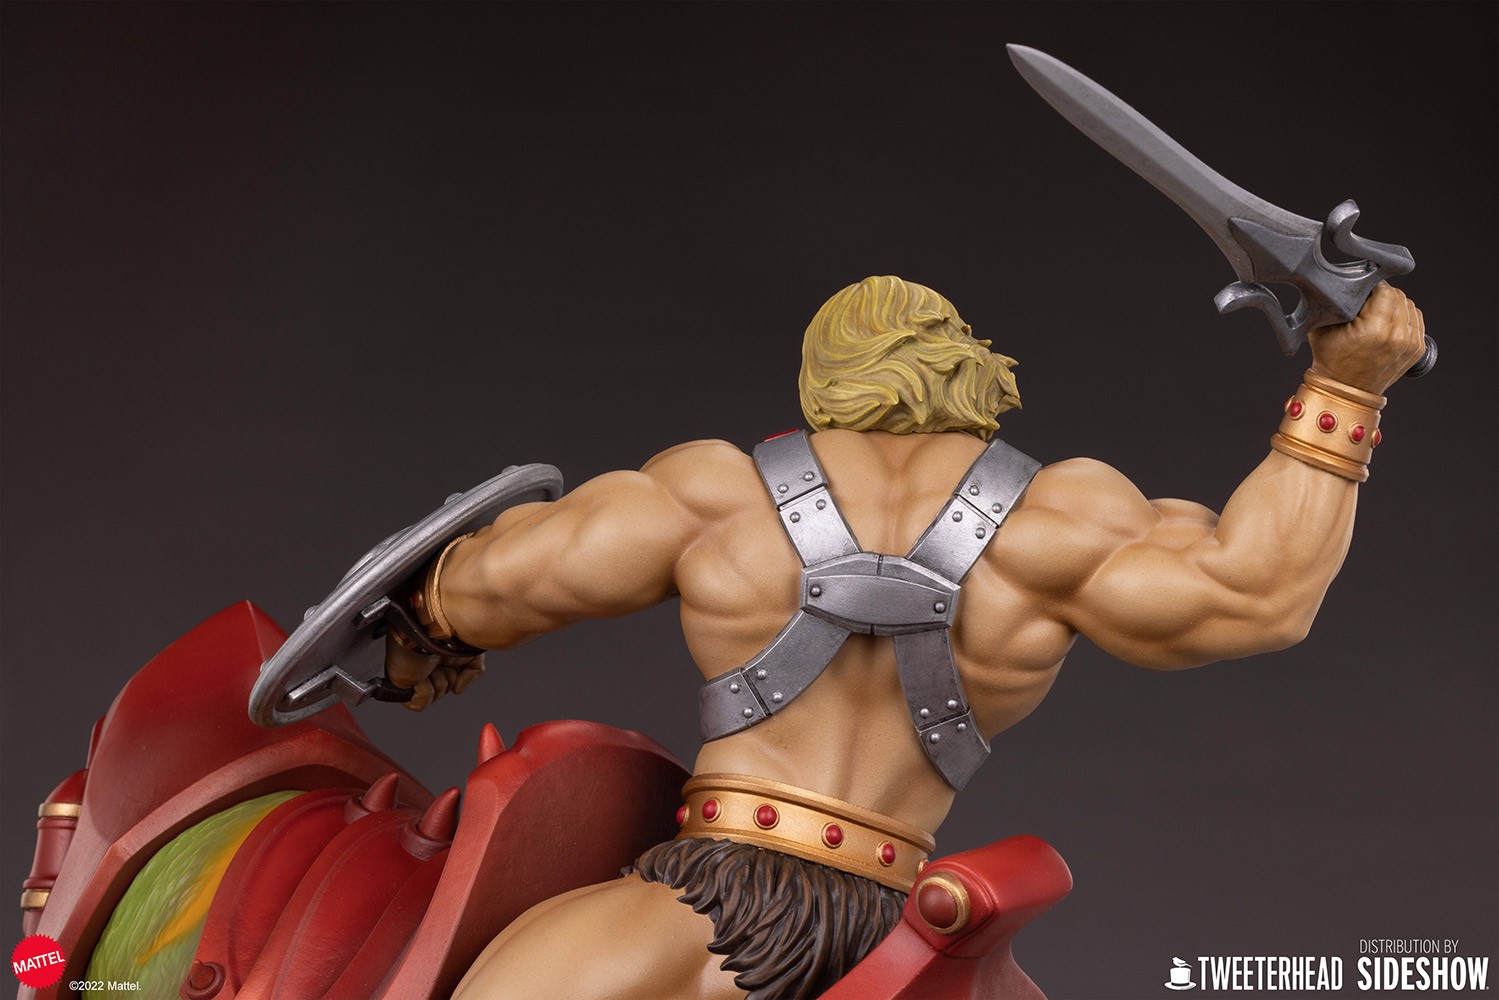 He-Man and Battle Cat Classic Deluxe Exclusive Edition (Prototype Shown) View 18